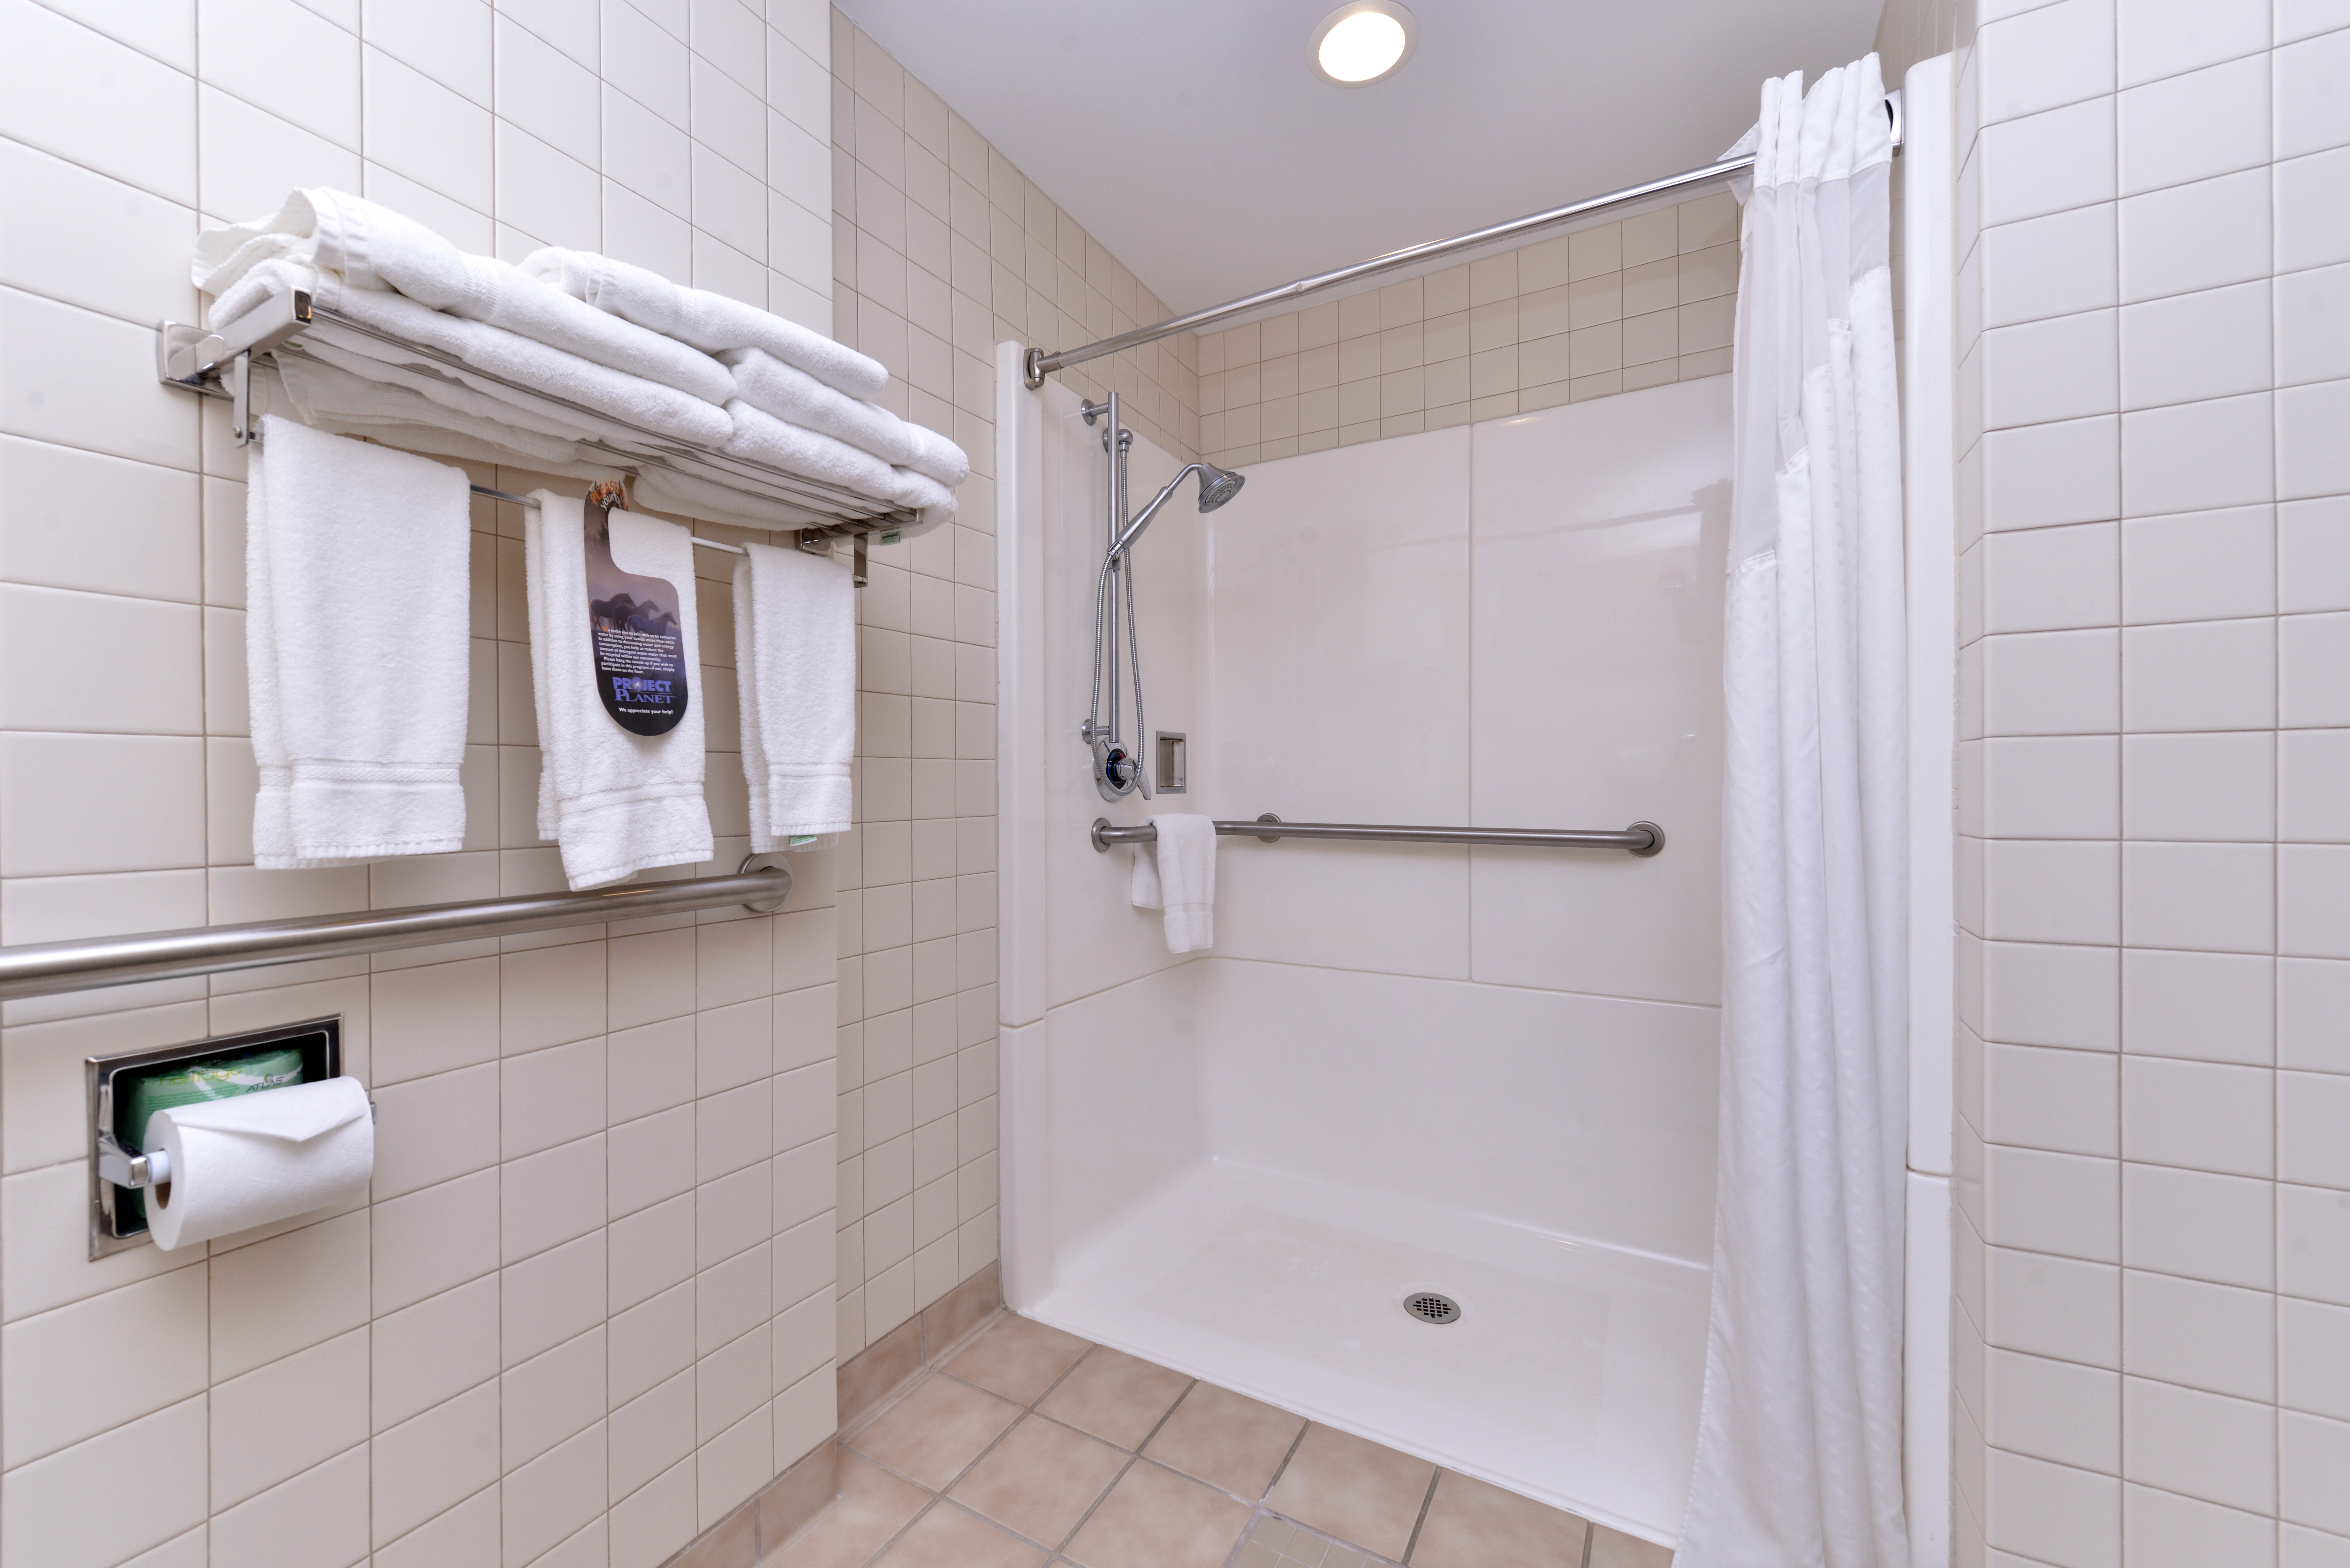 Handicap Accessible rooms with Roll-in shower